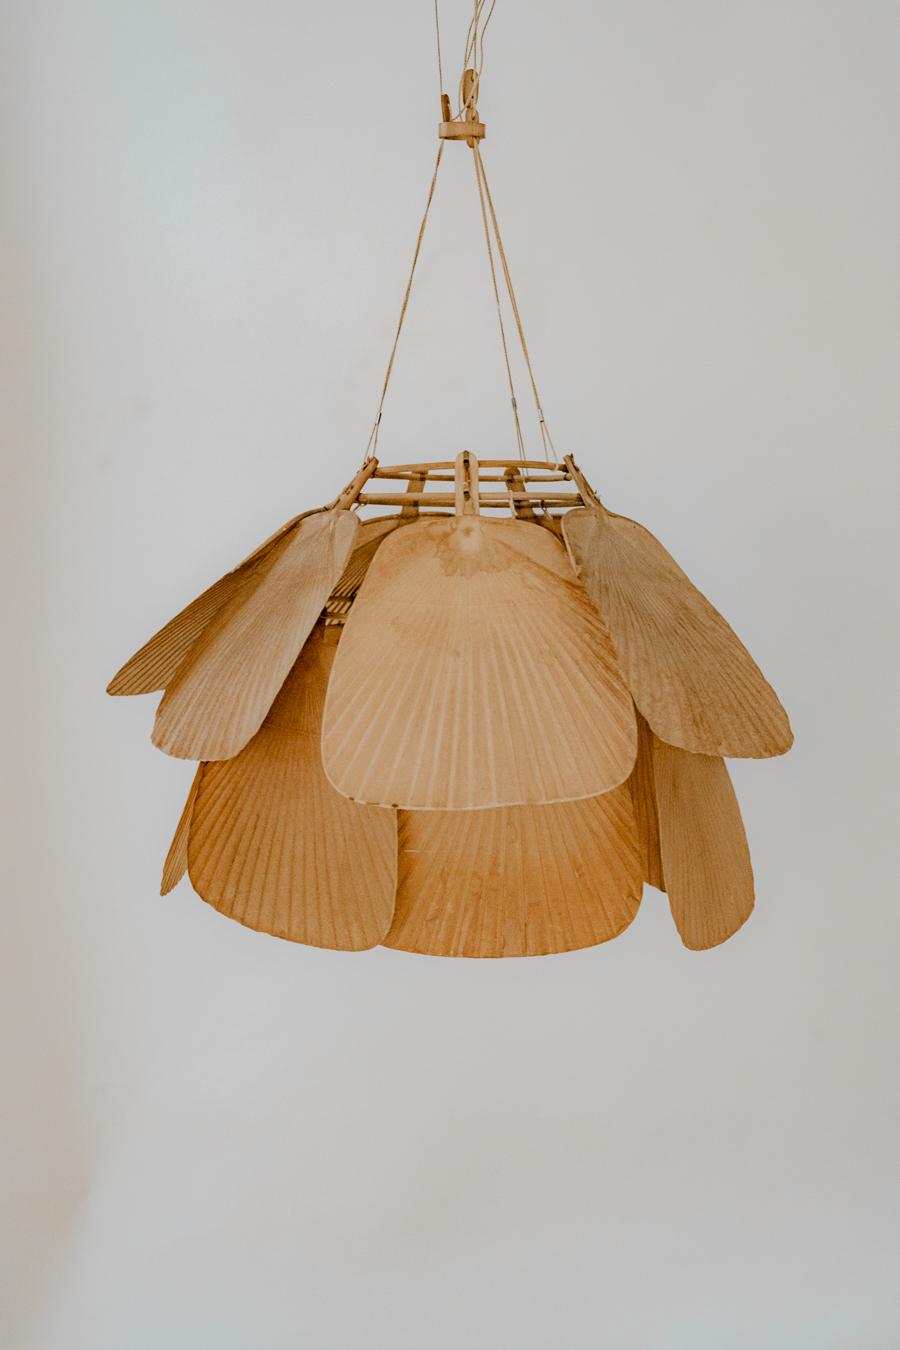 The Uchiwa pendant light, designed by Ingo Maurer for Design M, presents a captivating fusion of tradition and avant-garde, serving as an outstanding example of artistic exploration in the 1970s. Crafted from fourteen panels of bamboo and rice